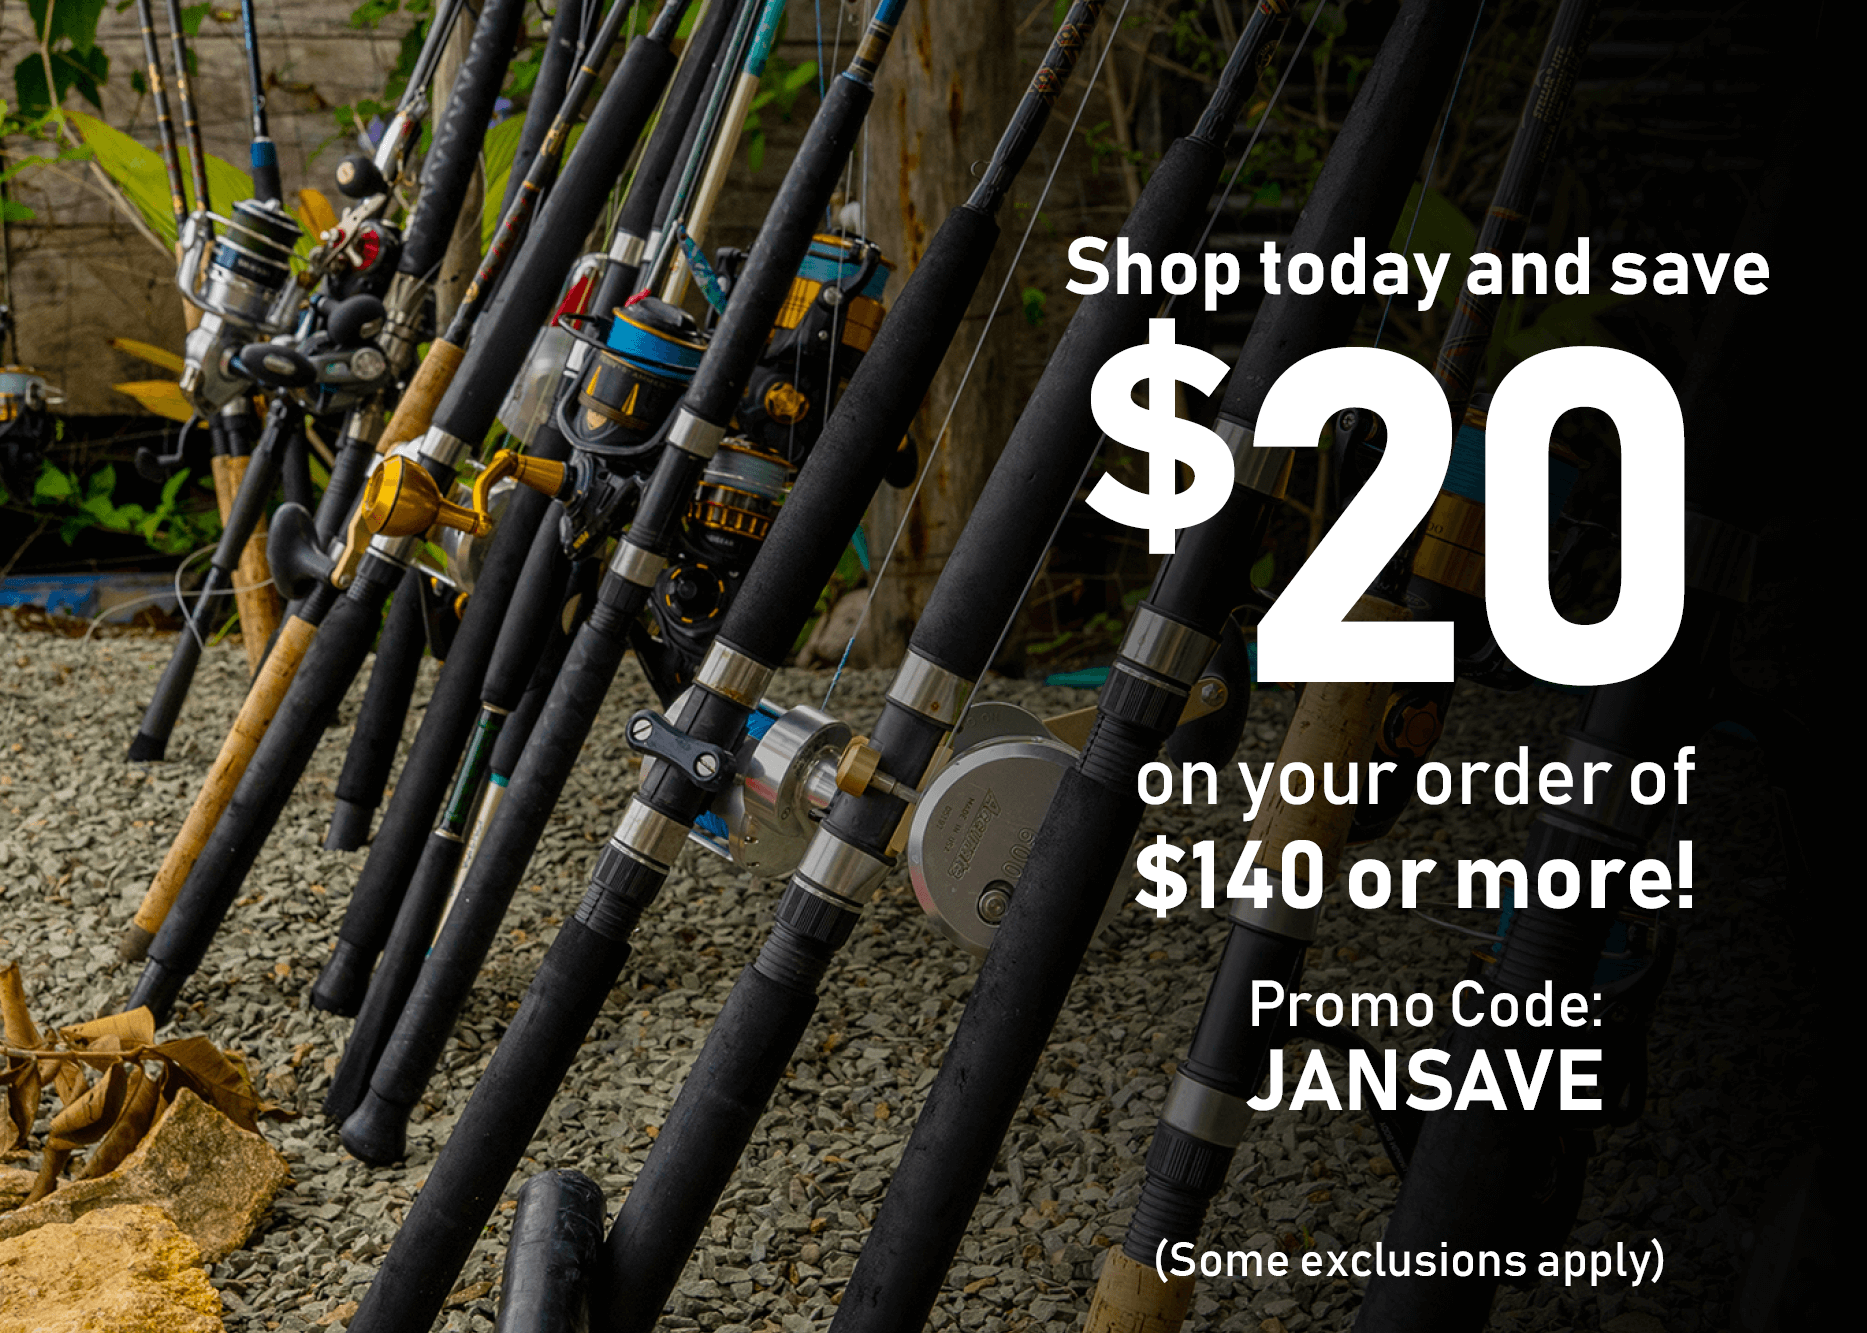 Shop today and save $20 on your order of $140 or more!